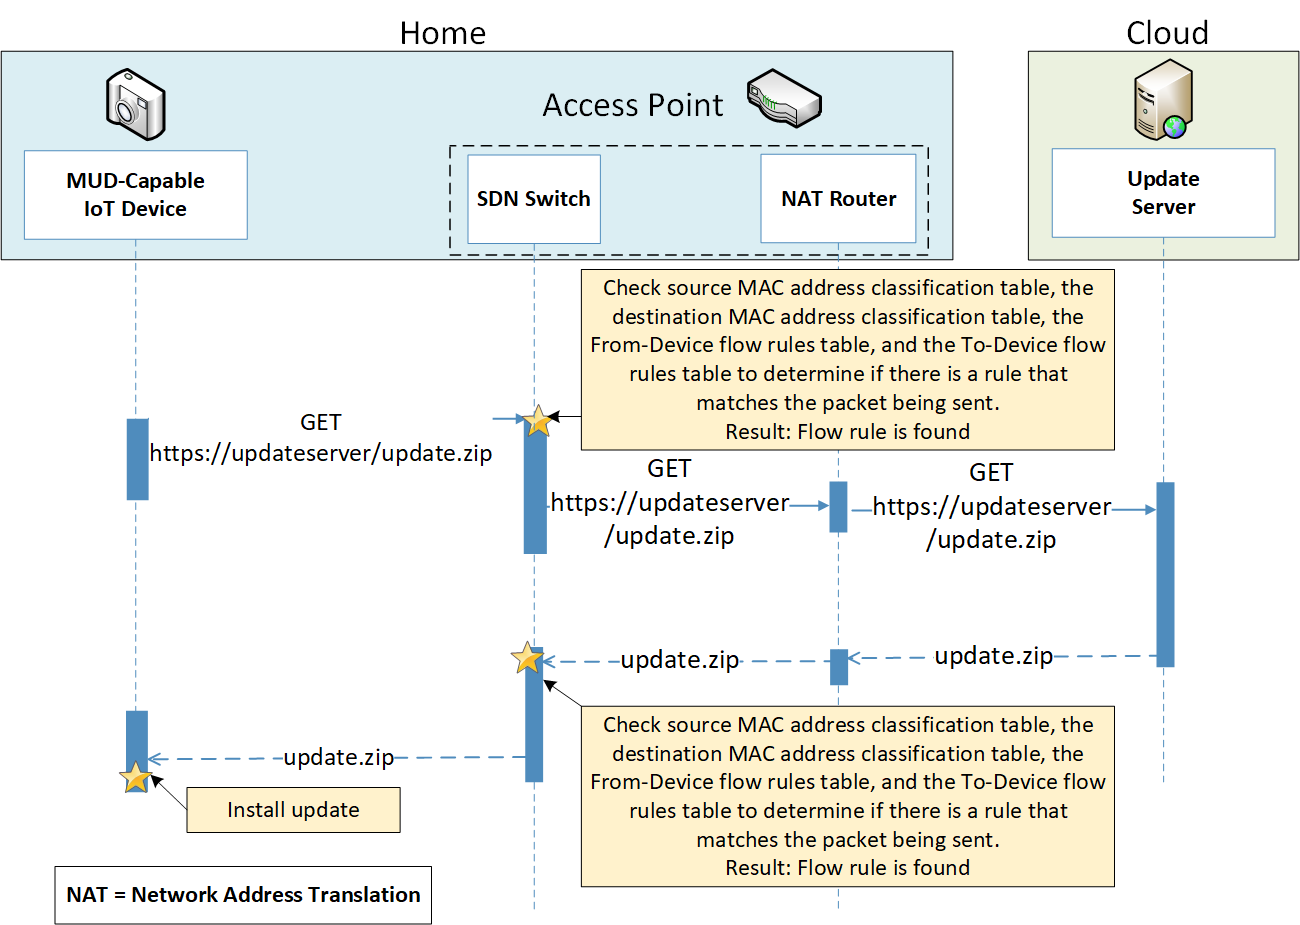 Diagram of Update Process Message Flow for Build 4. Explanation is found directly below this diagram.